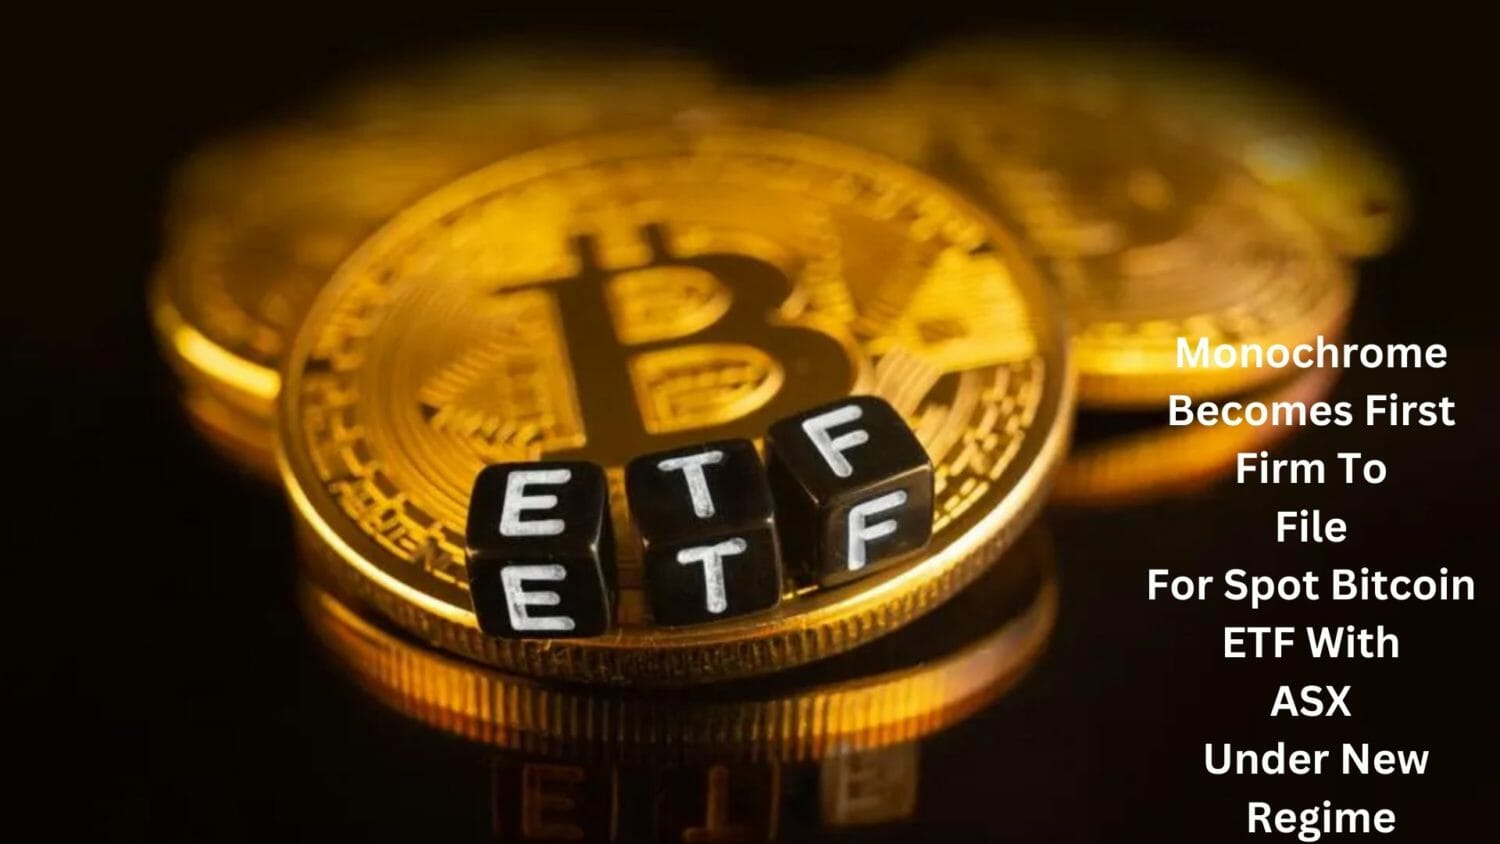 Monochrome Becomes First Firm To File For Spot Bitcoin Etf With Asx Under New Regulatory Regime